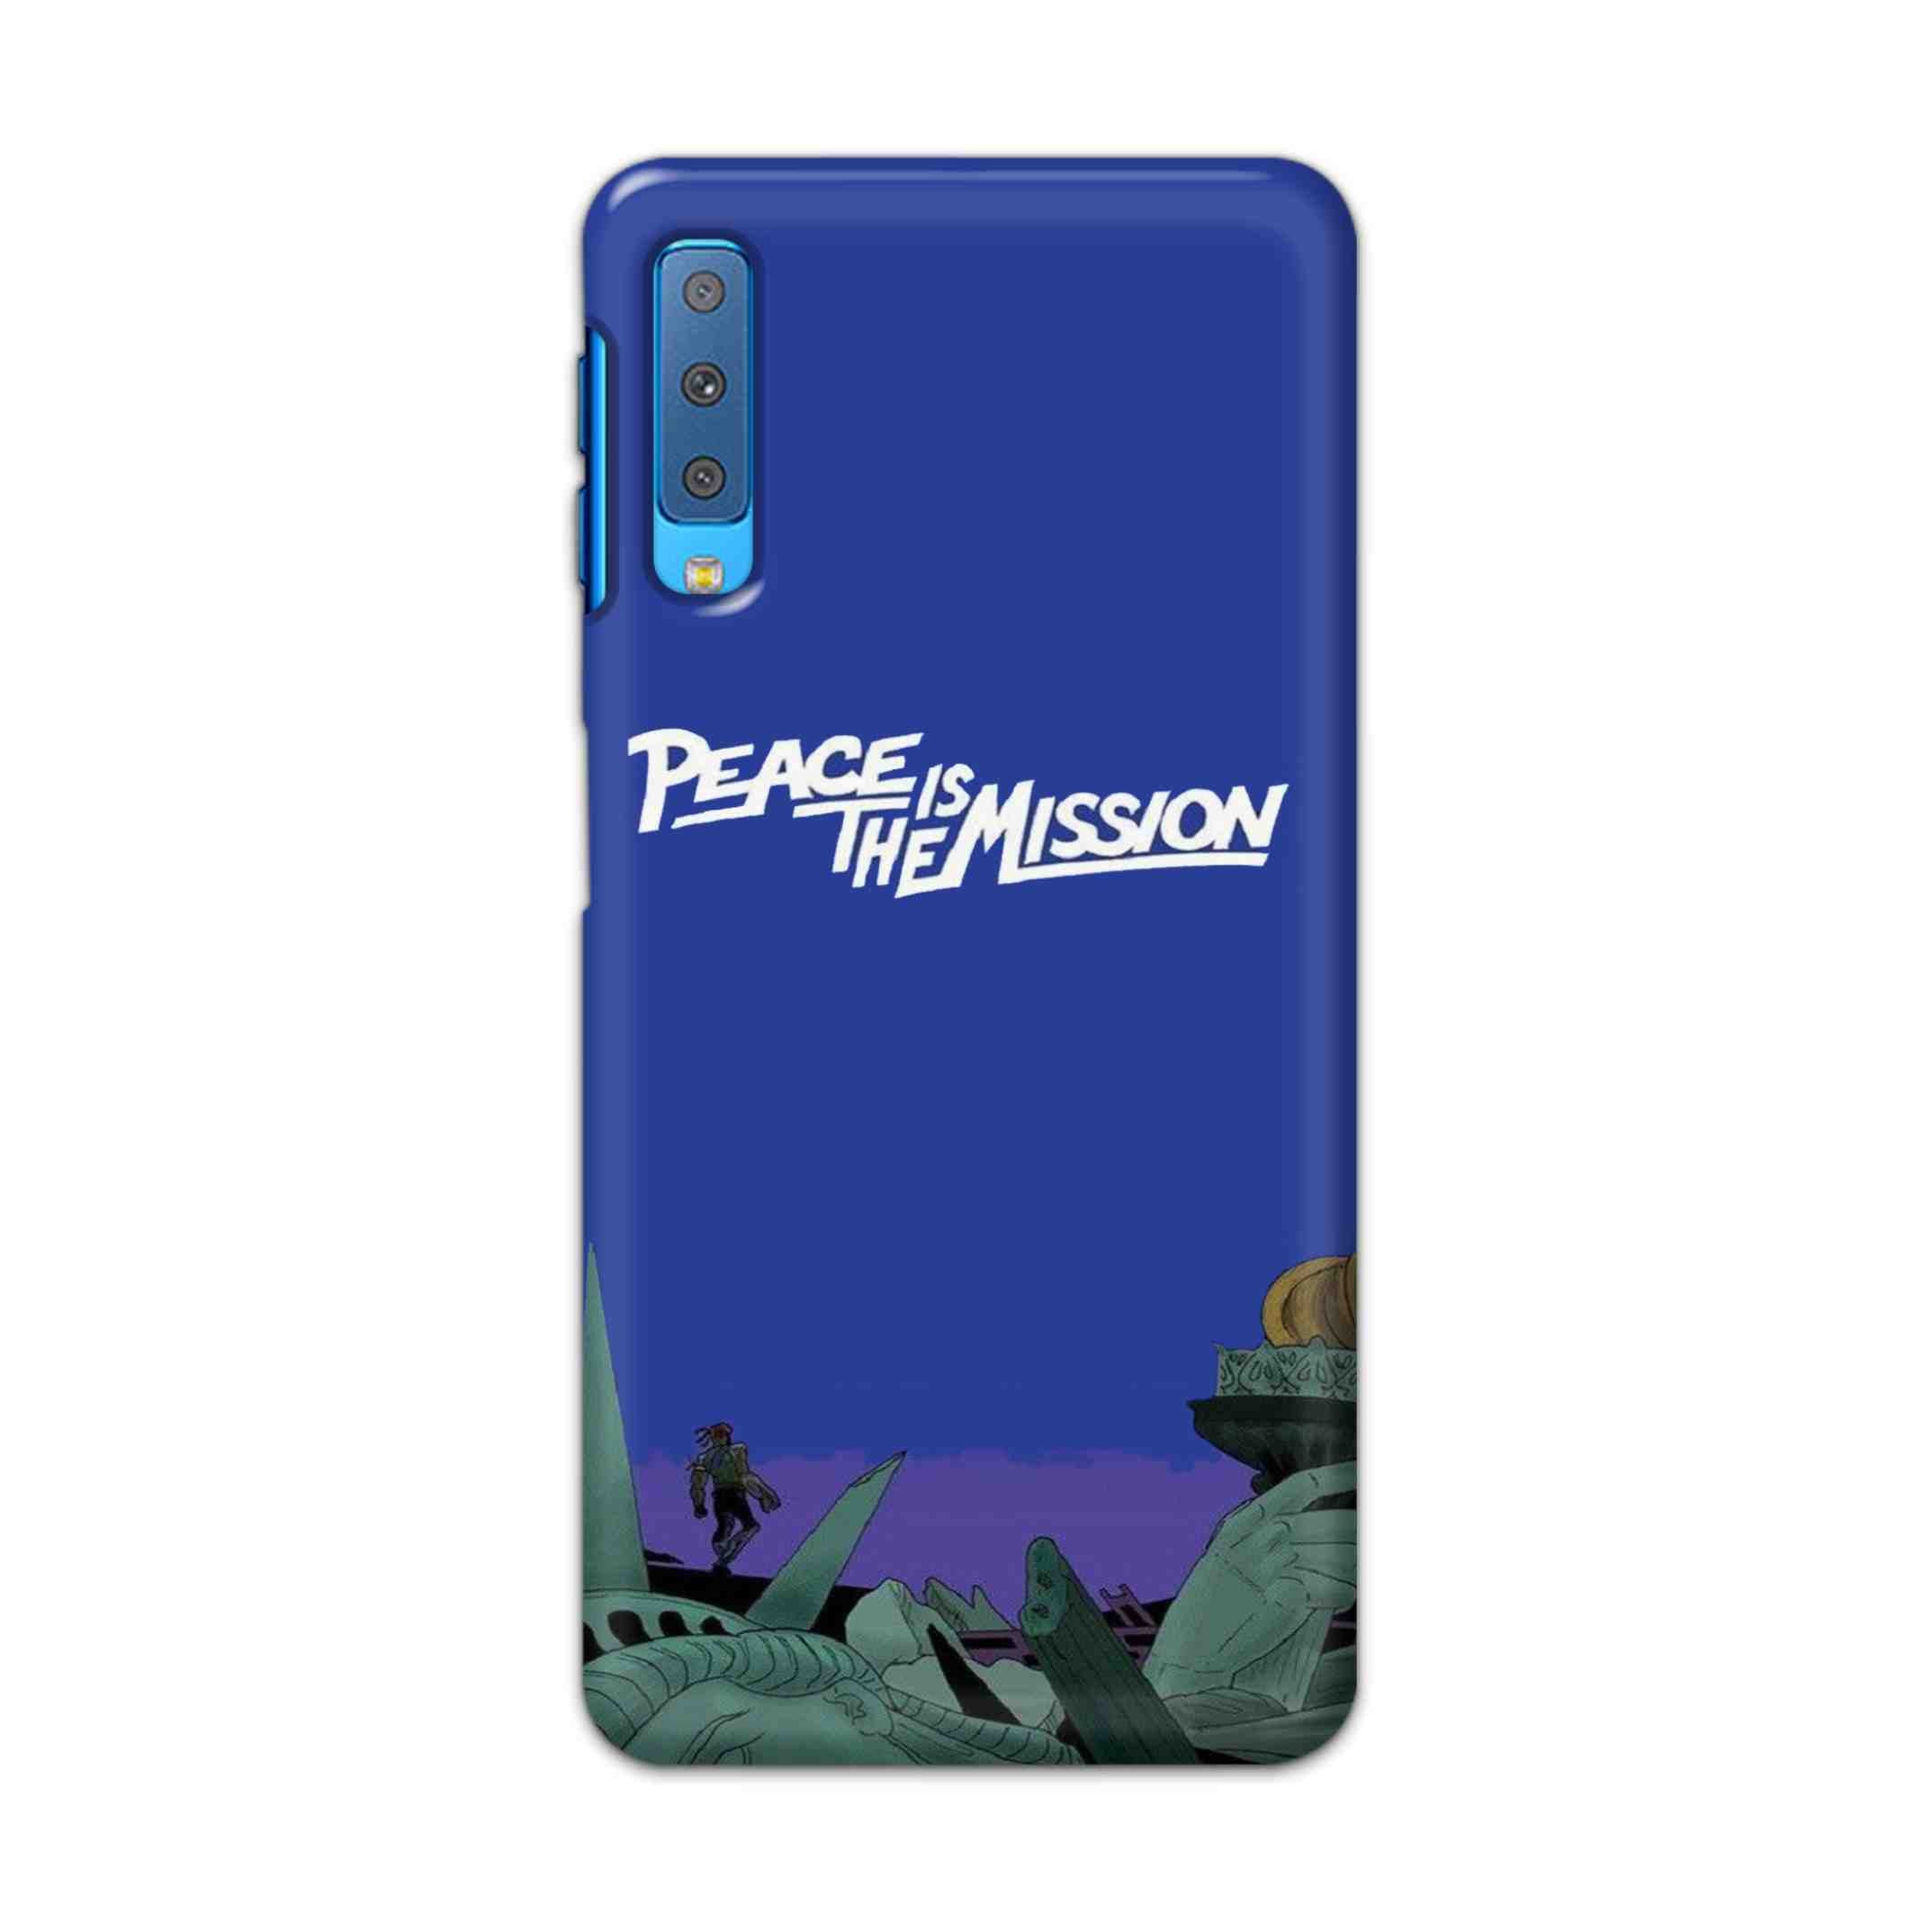 Buy Peace Is The Misson Hard Back Mobile Phone Case Cover For Samsung Galaxy A7 2018 Online